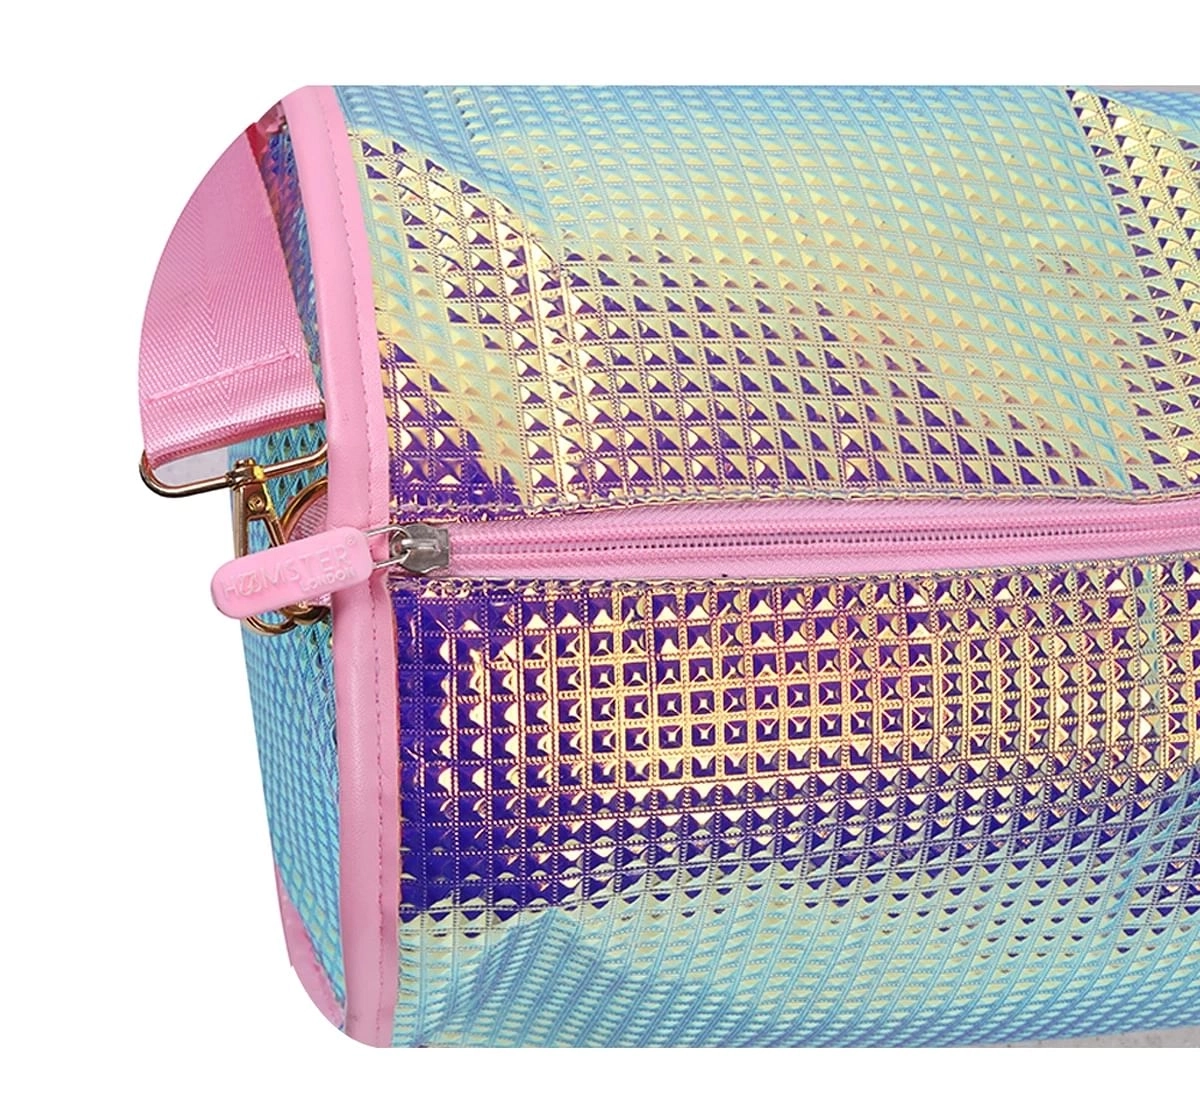 Hamster London Drum Duffle Holographic Gym Bag, Pink